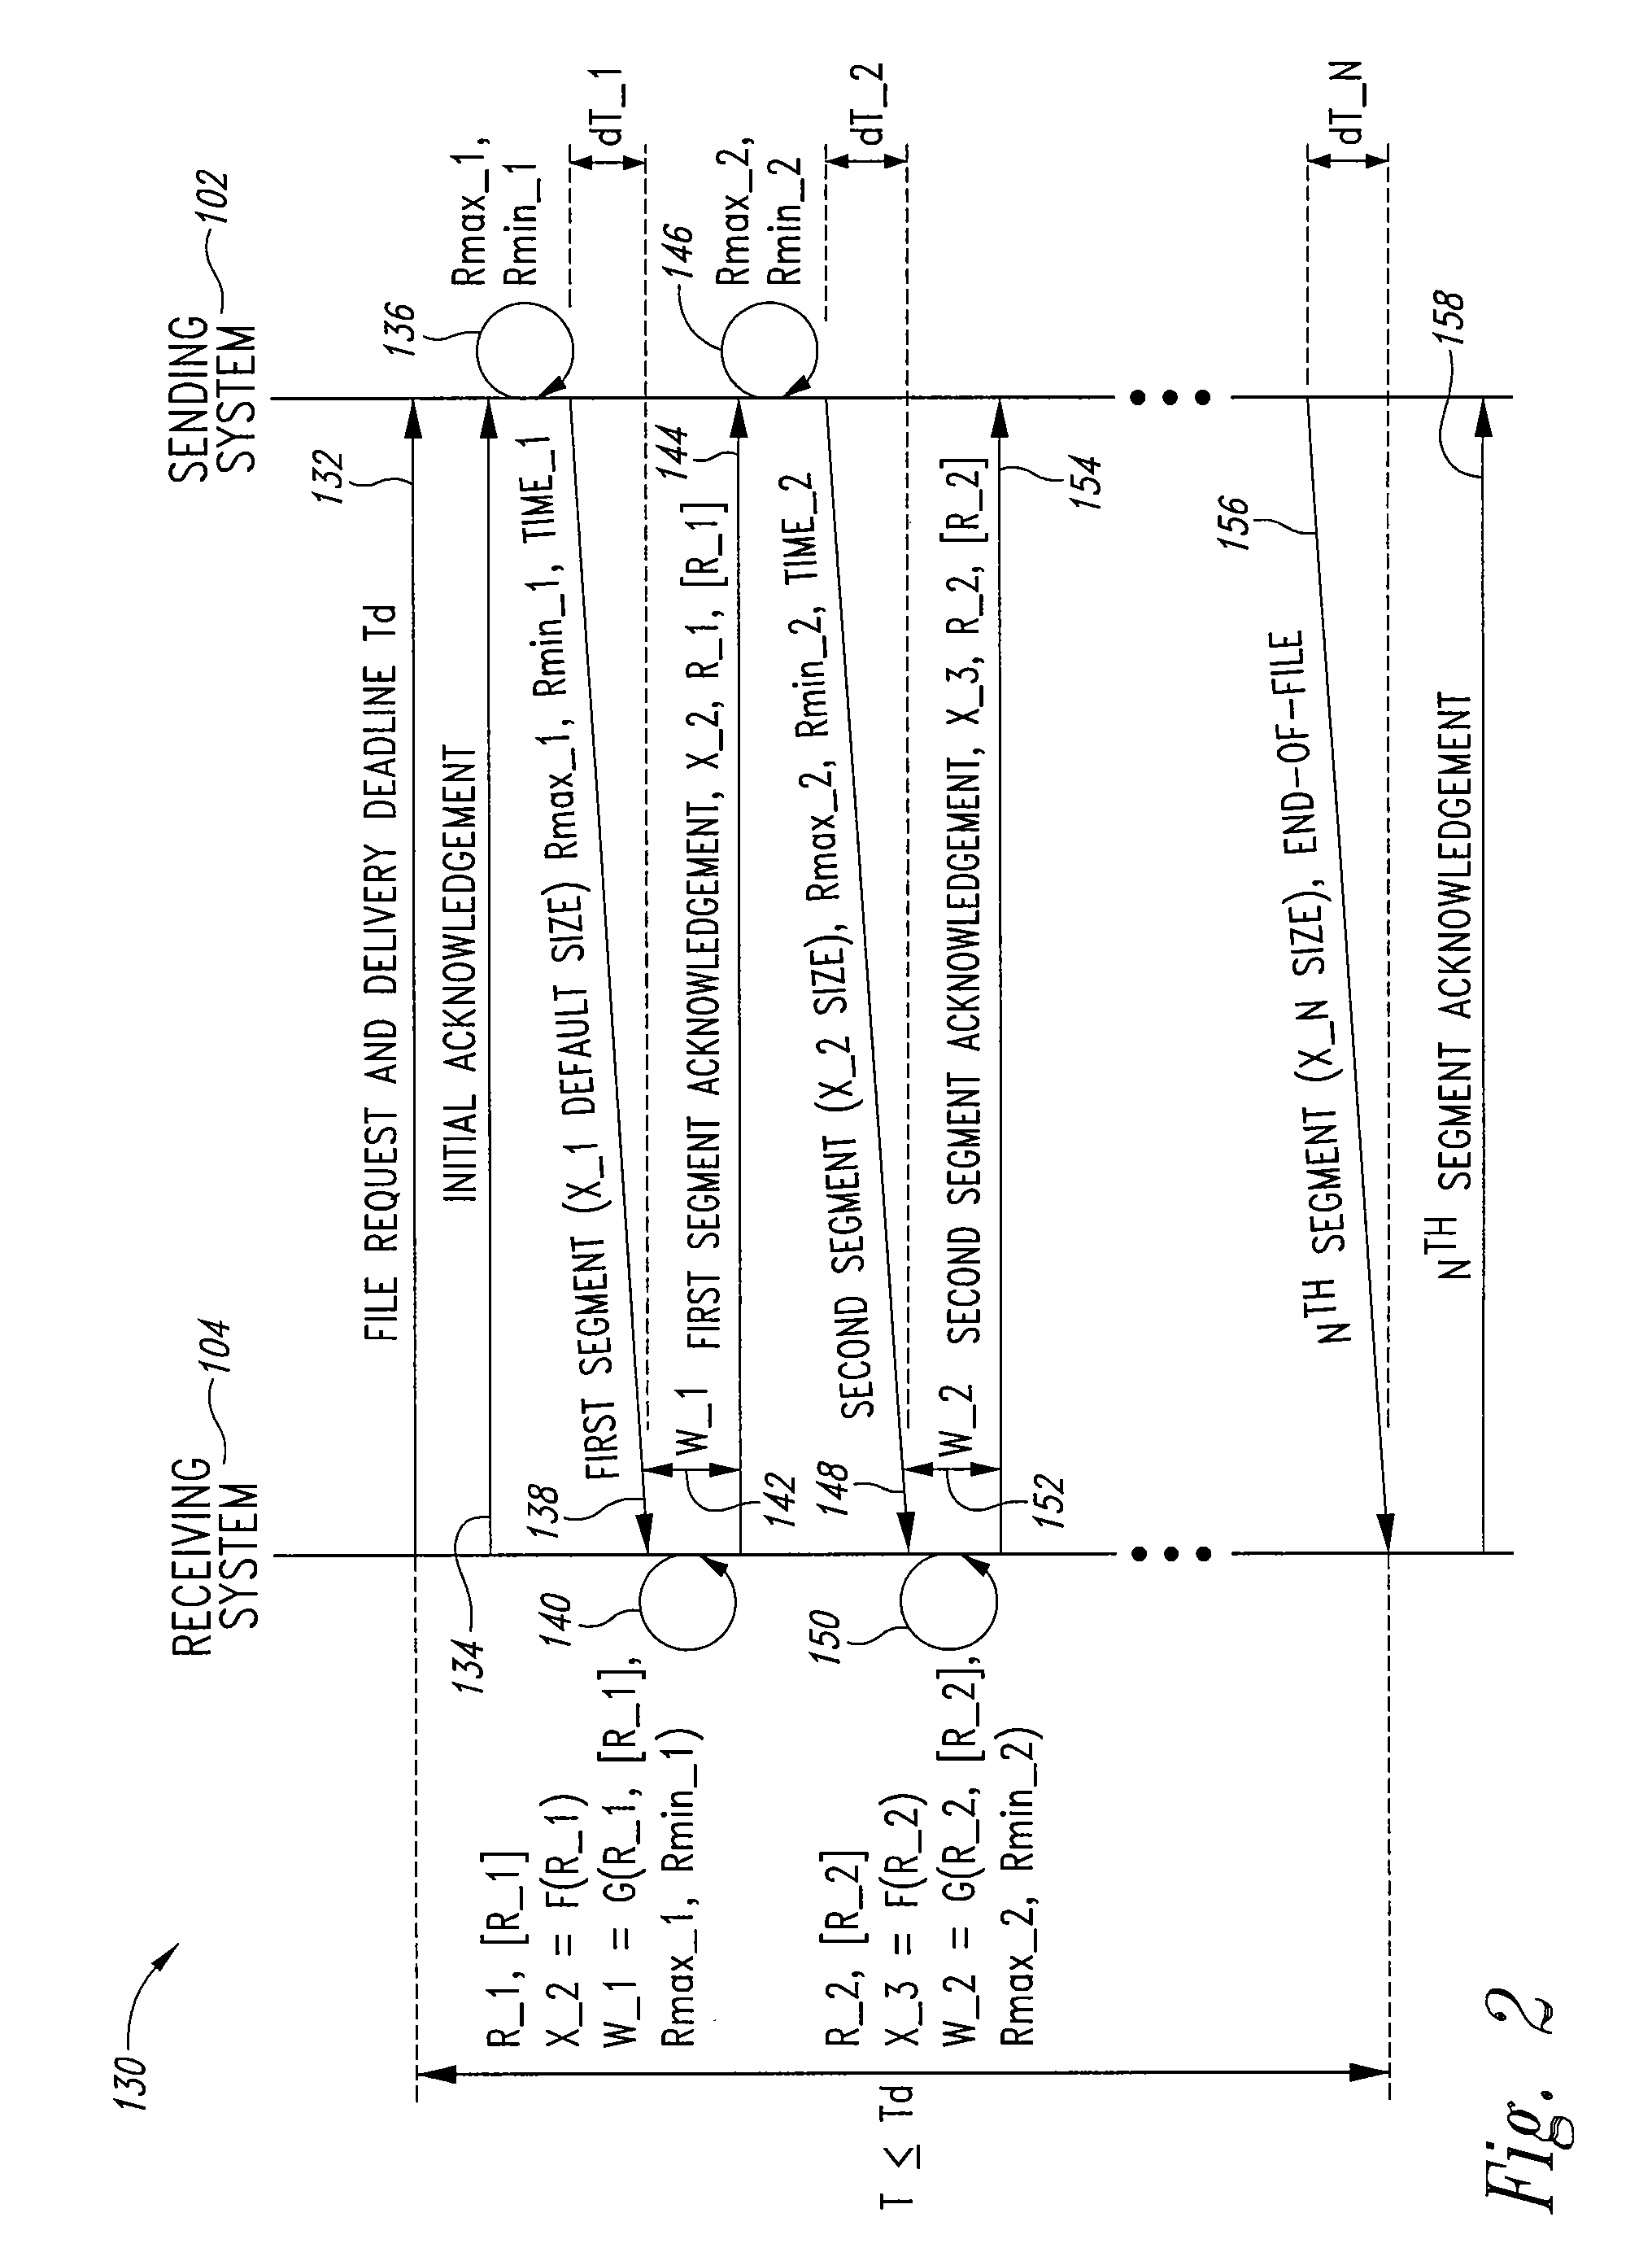 Adaptive file delivery system and method